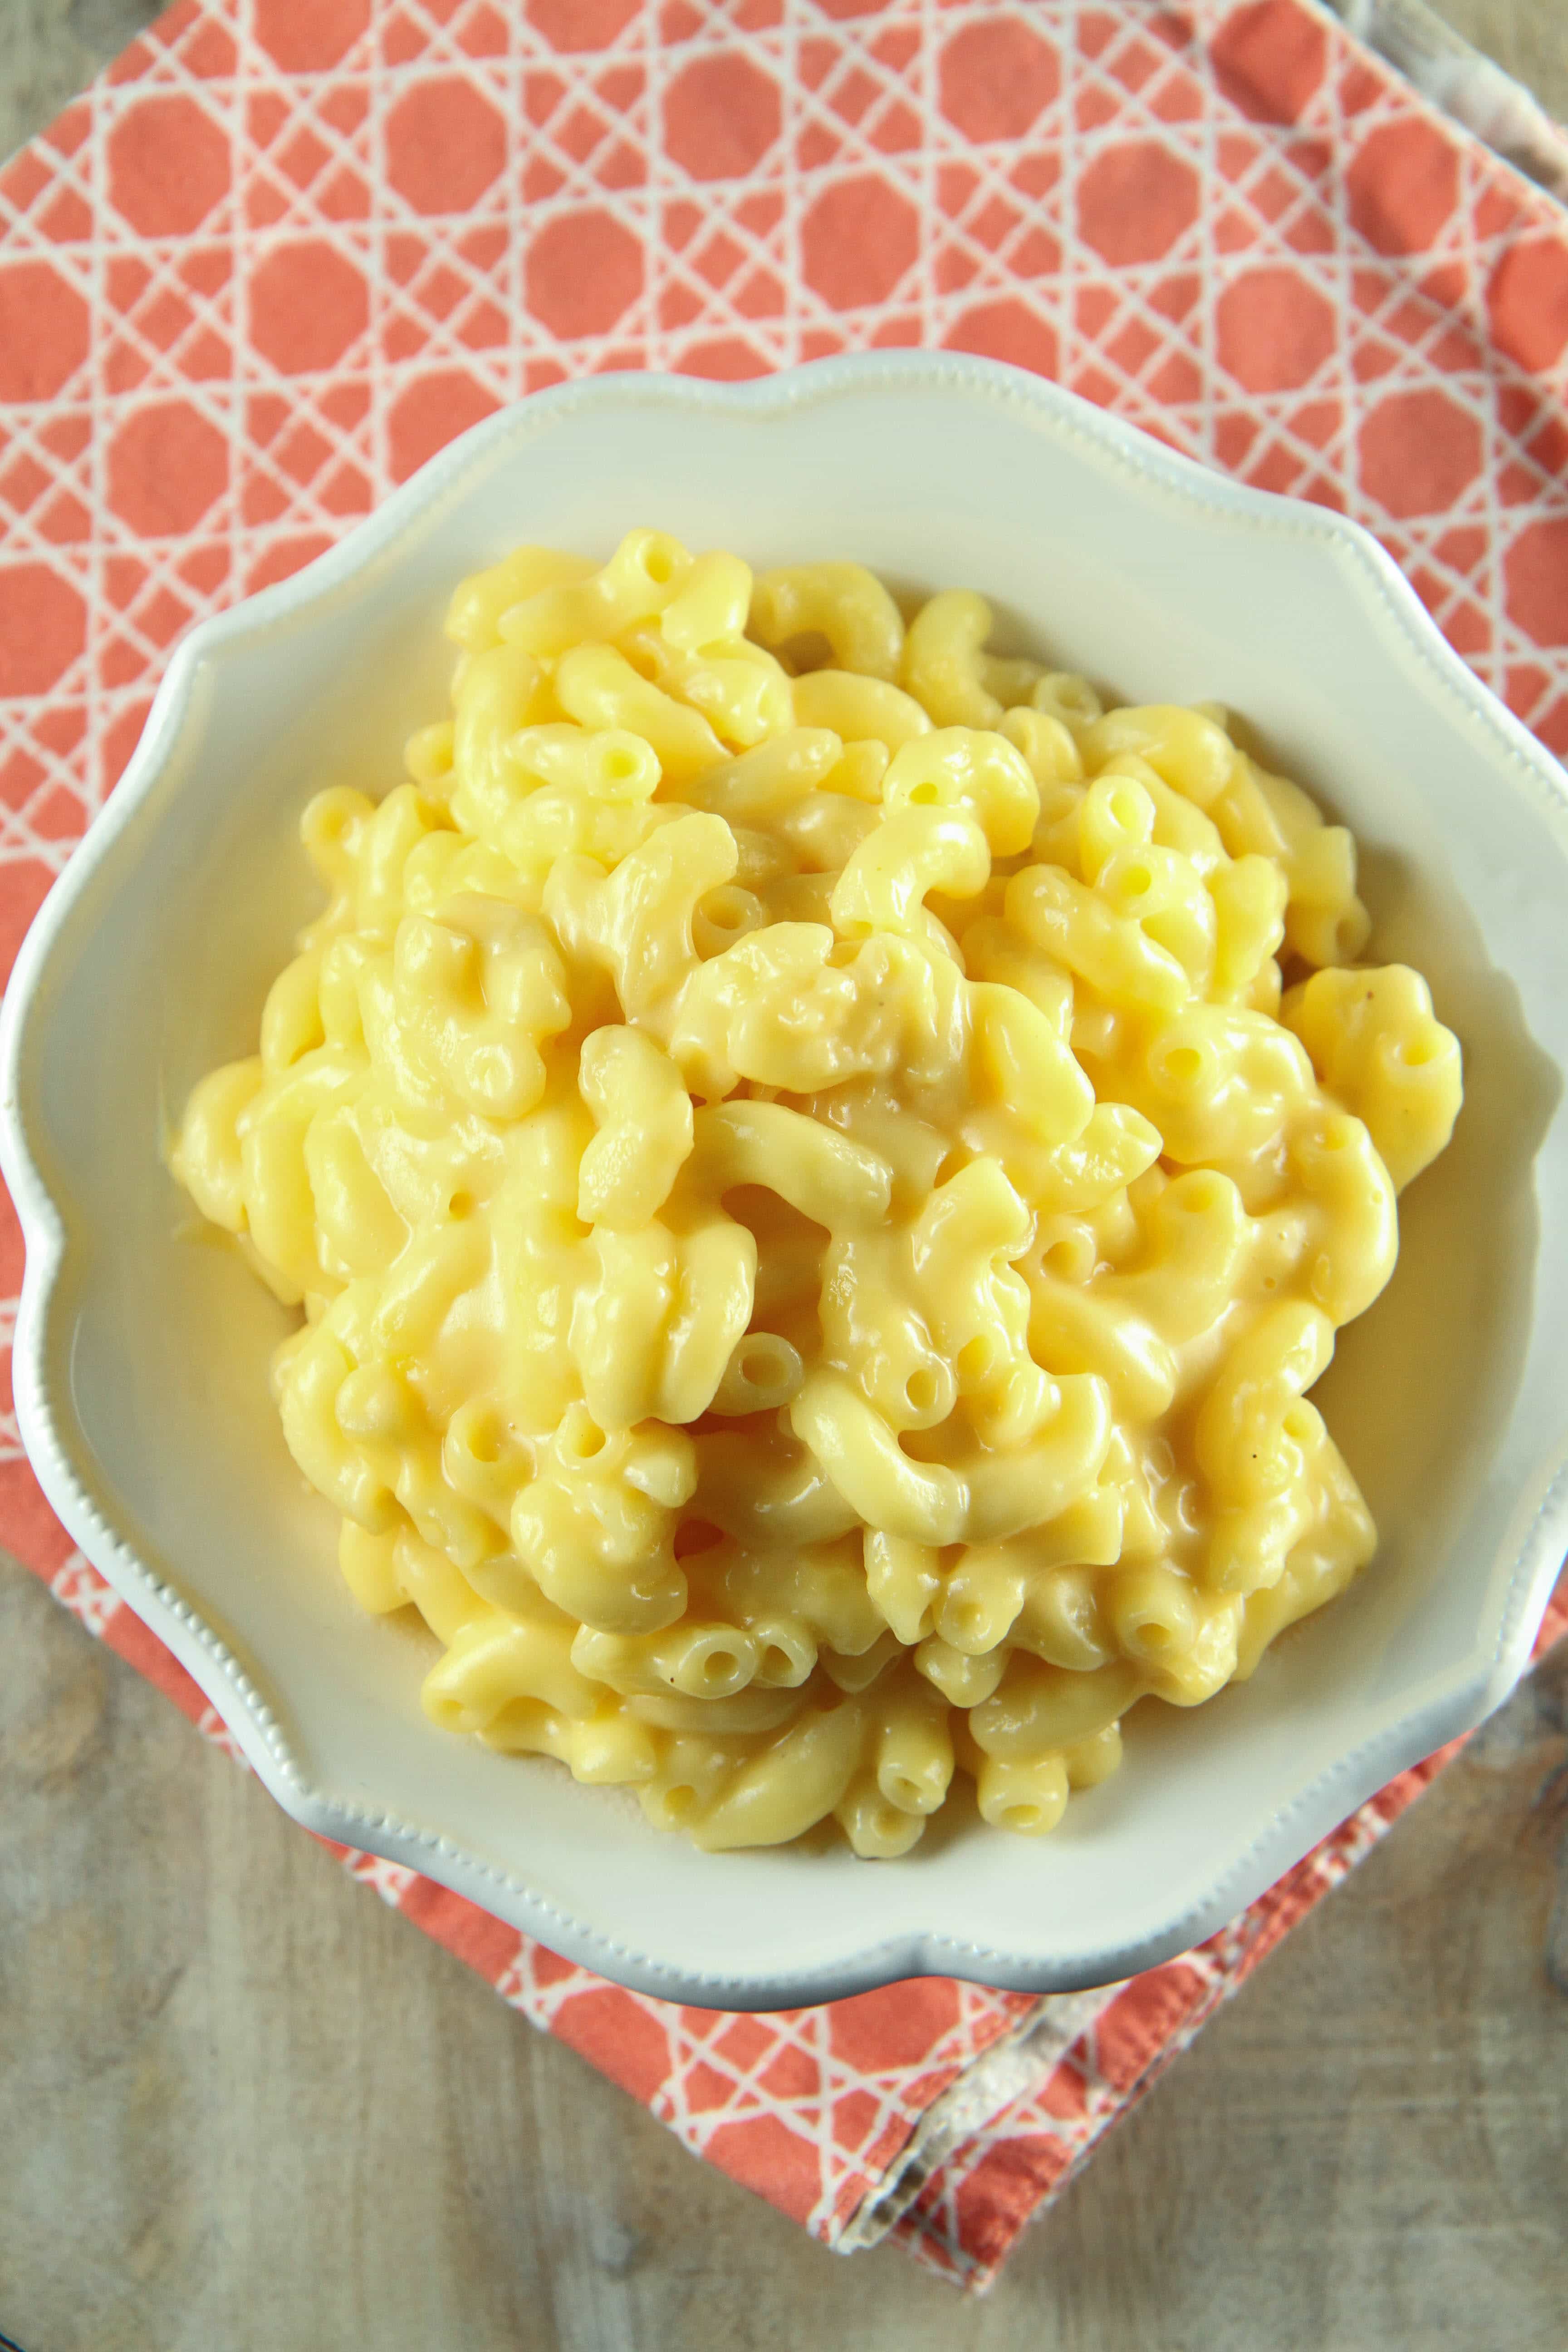 One-Pot Gluten-Free Macaroni and Cheese from MomAdvice.com